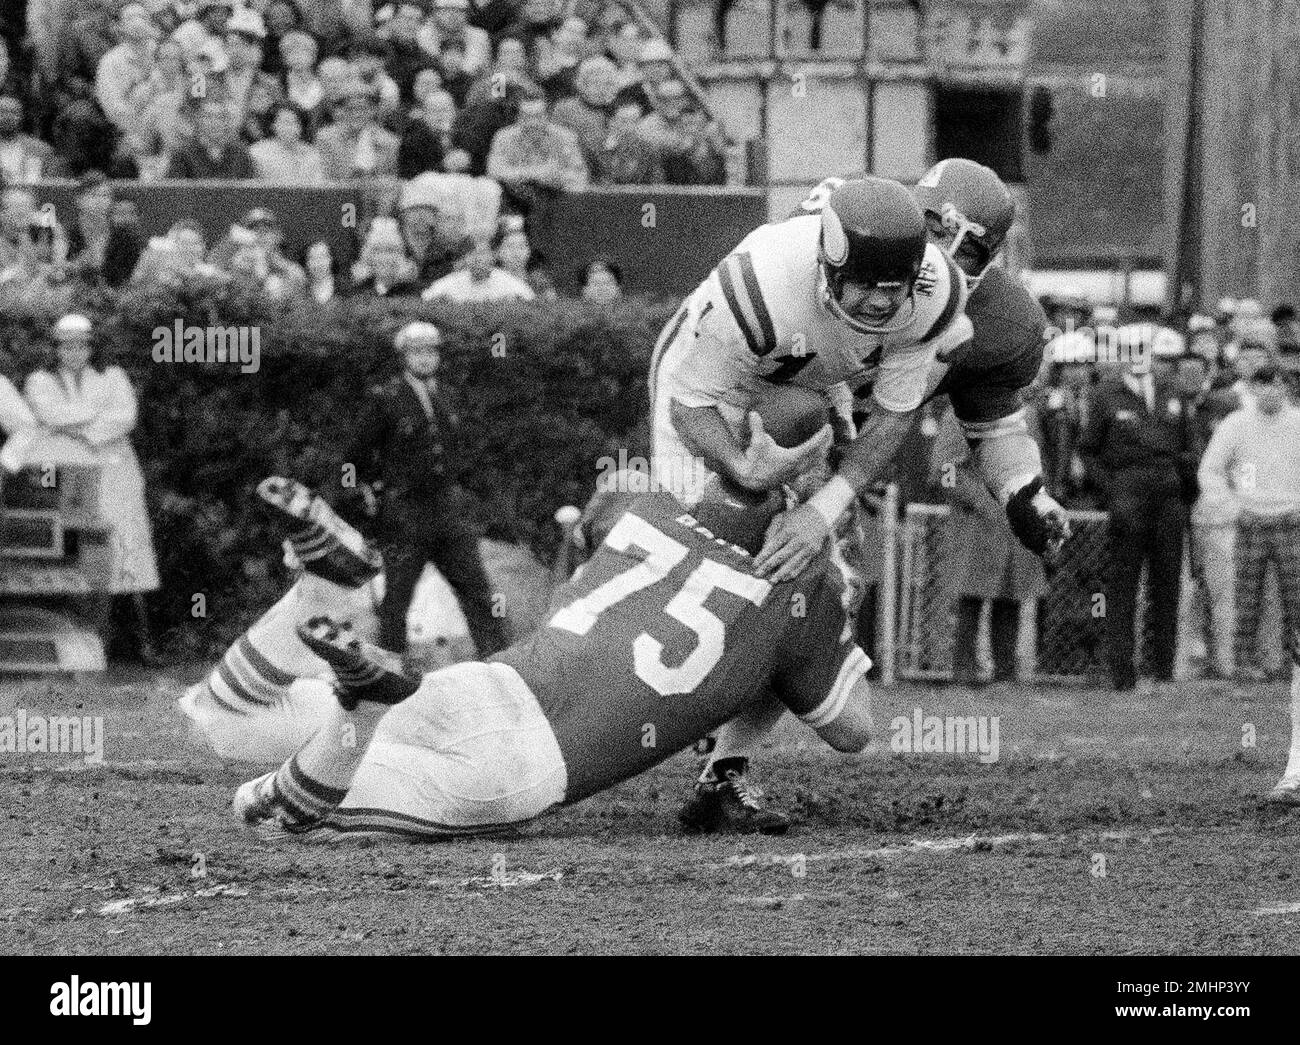 FILE - In this Jan. 11, 1970, file photo, Minnesota Viking quarterback Joe  Kapp is hauled down by Kansas City Chiefs' Jerry Mays (75) as another  Chiefs player moves in from the